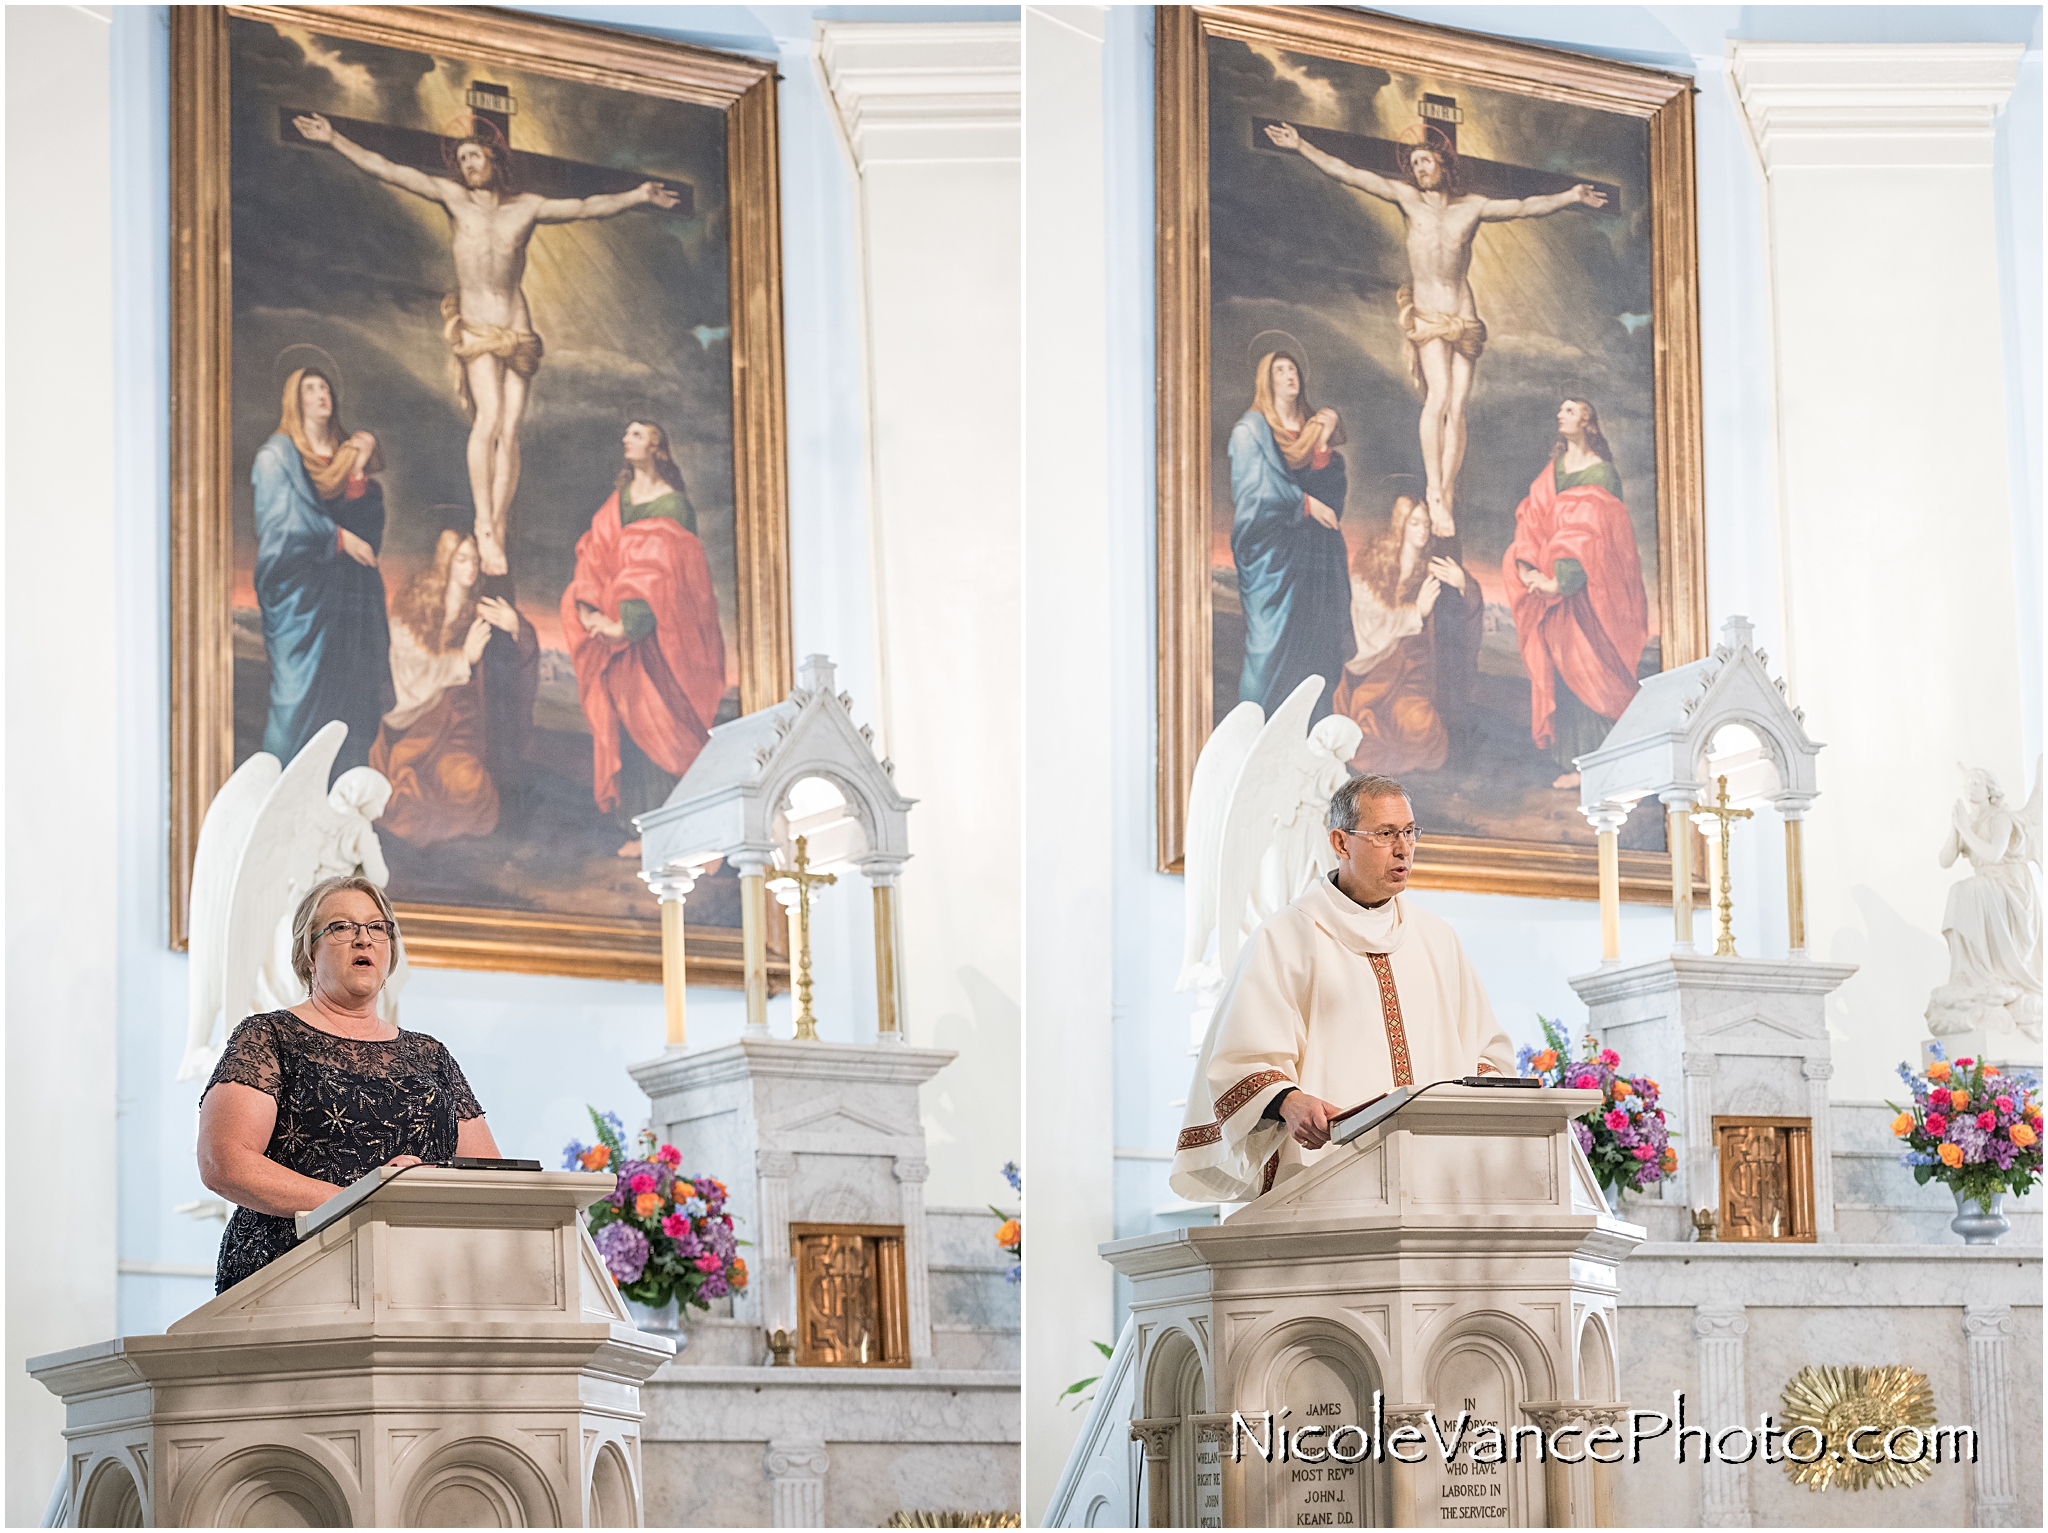 Scripture is read during a wedding ceremony at St Peter's Catholic Church in Richmond, Virginia.